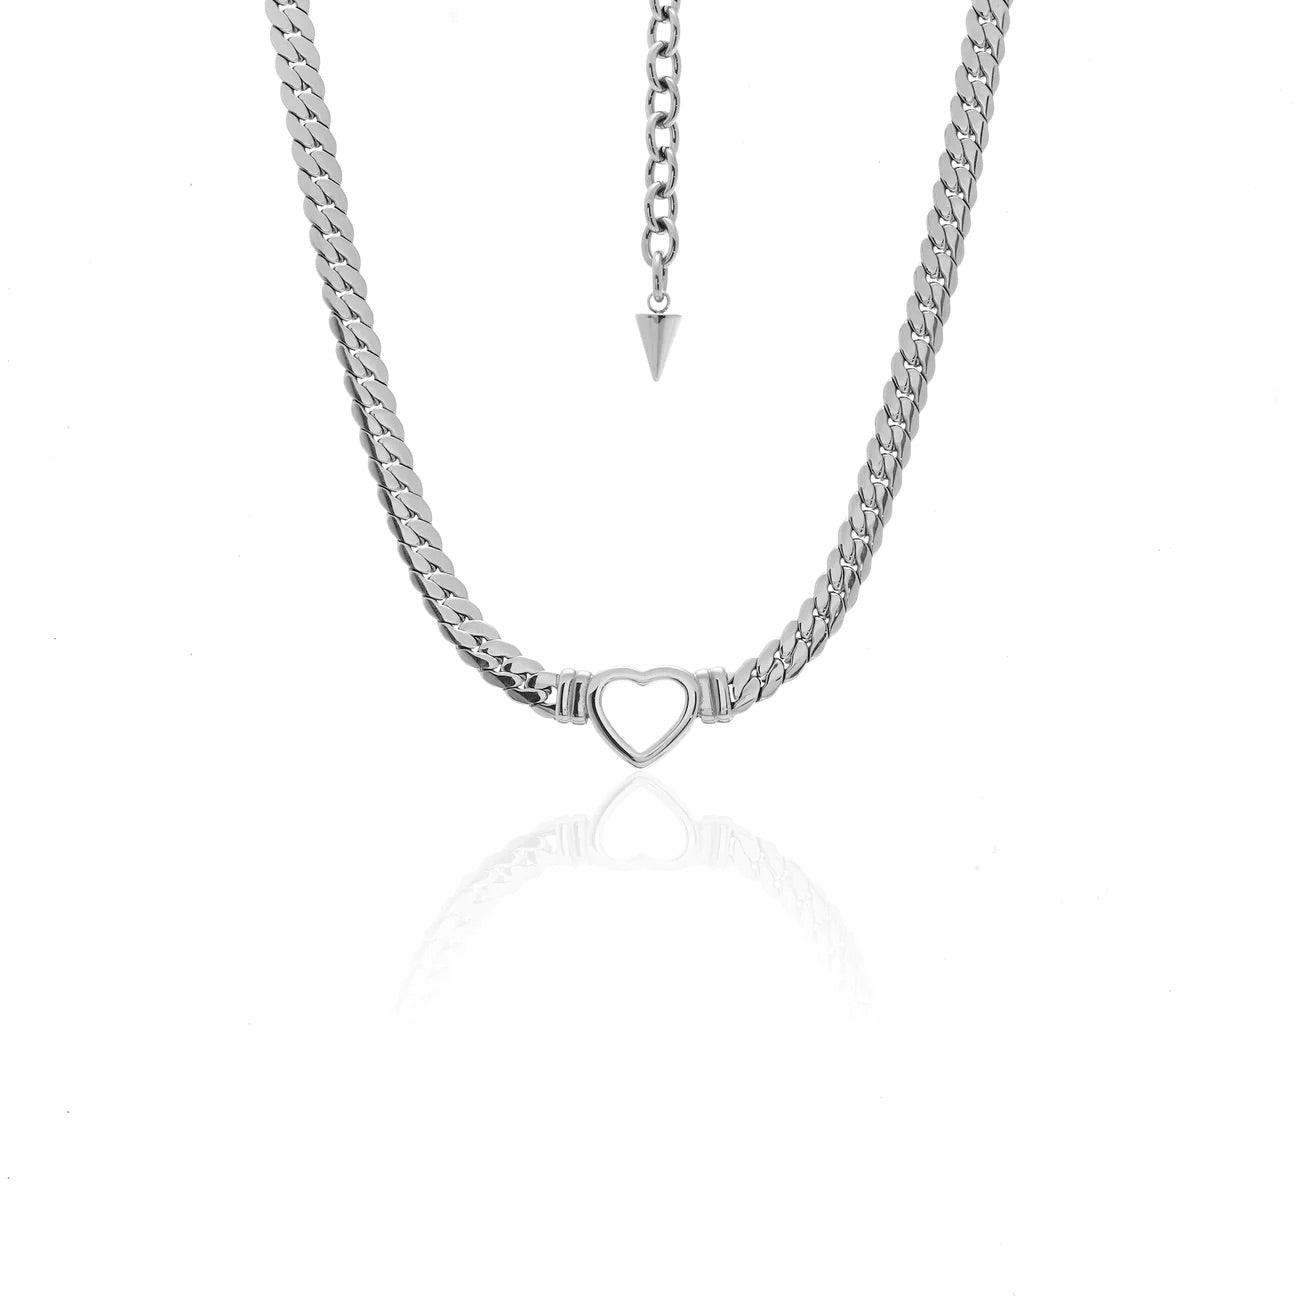 Valentina Necklace By Silk and Steel - Silver